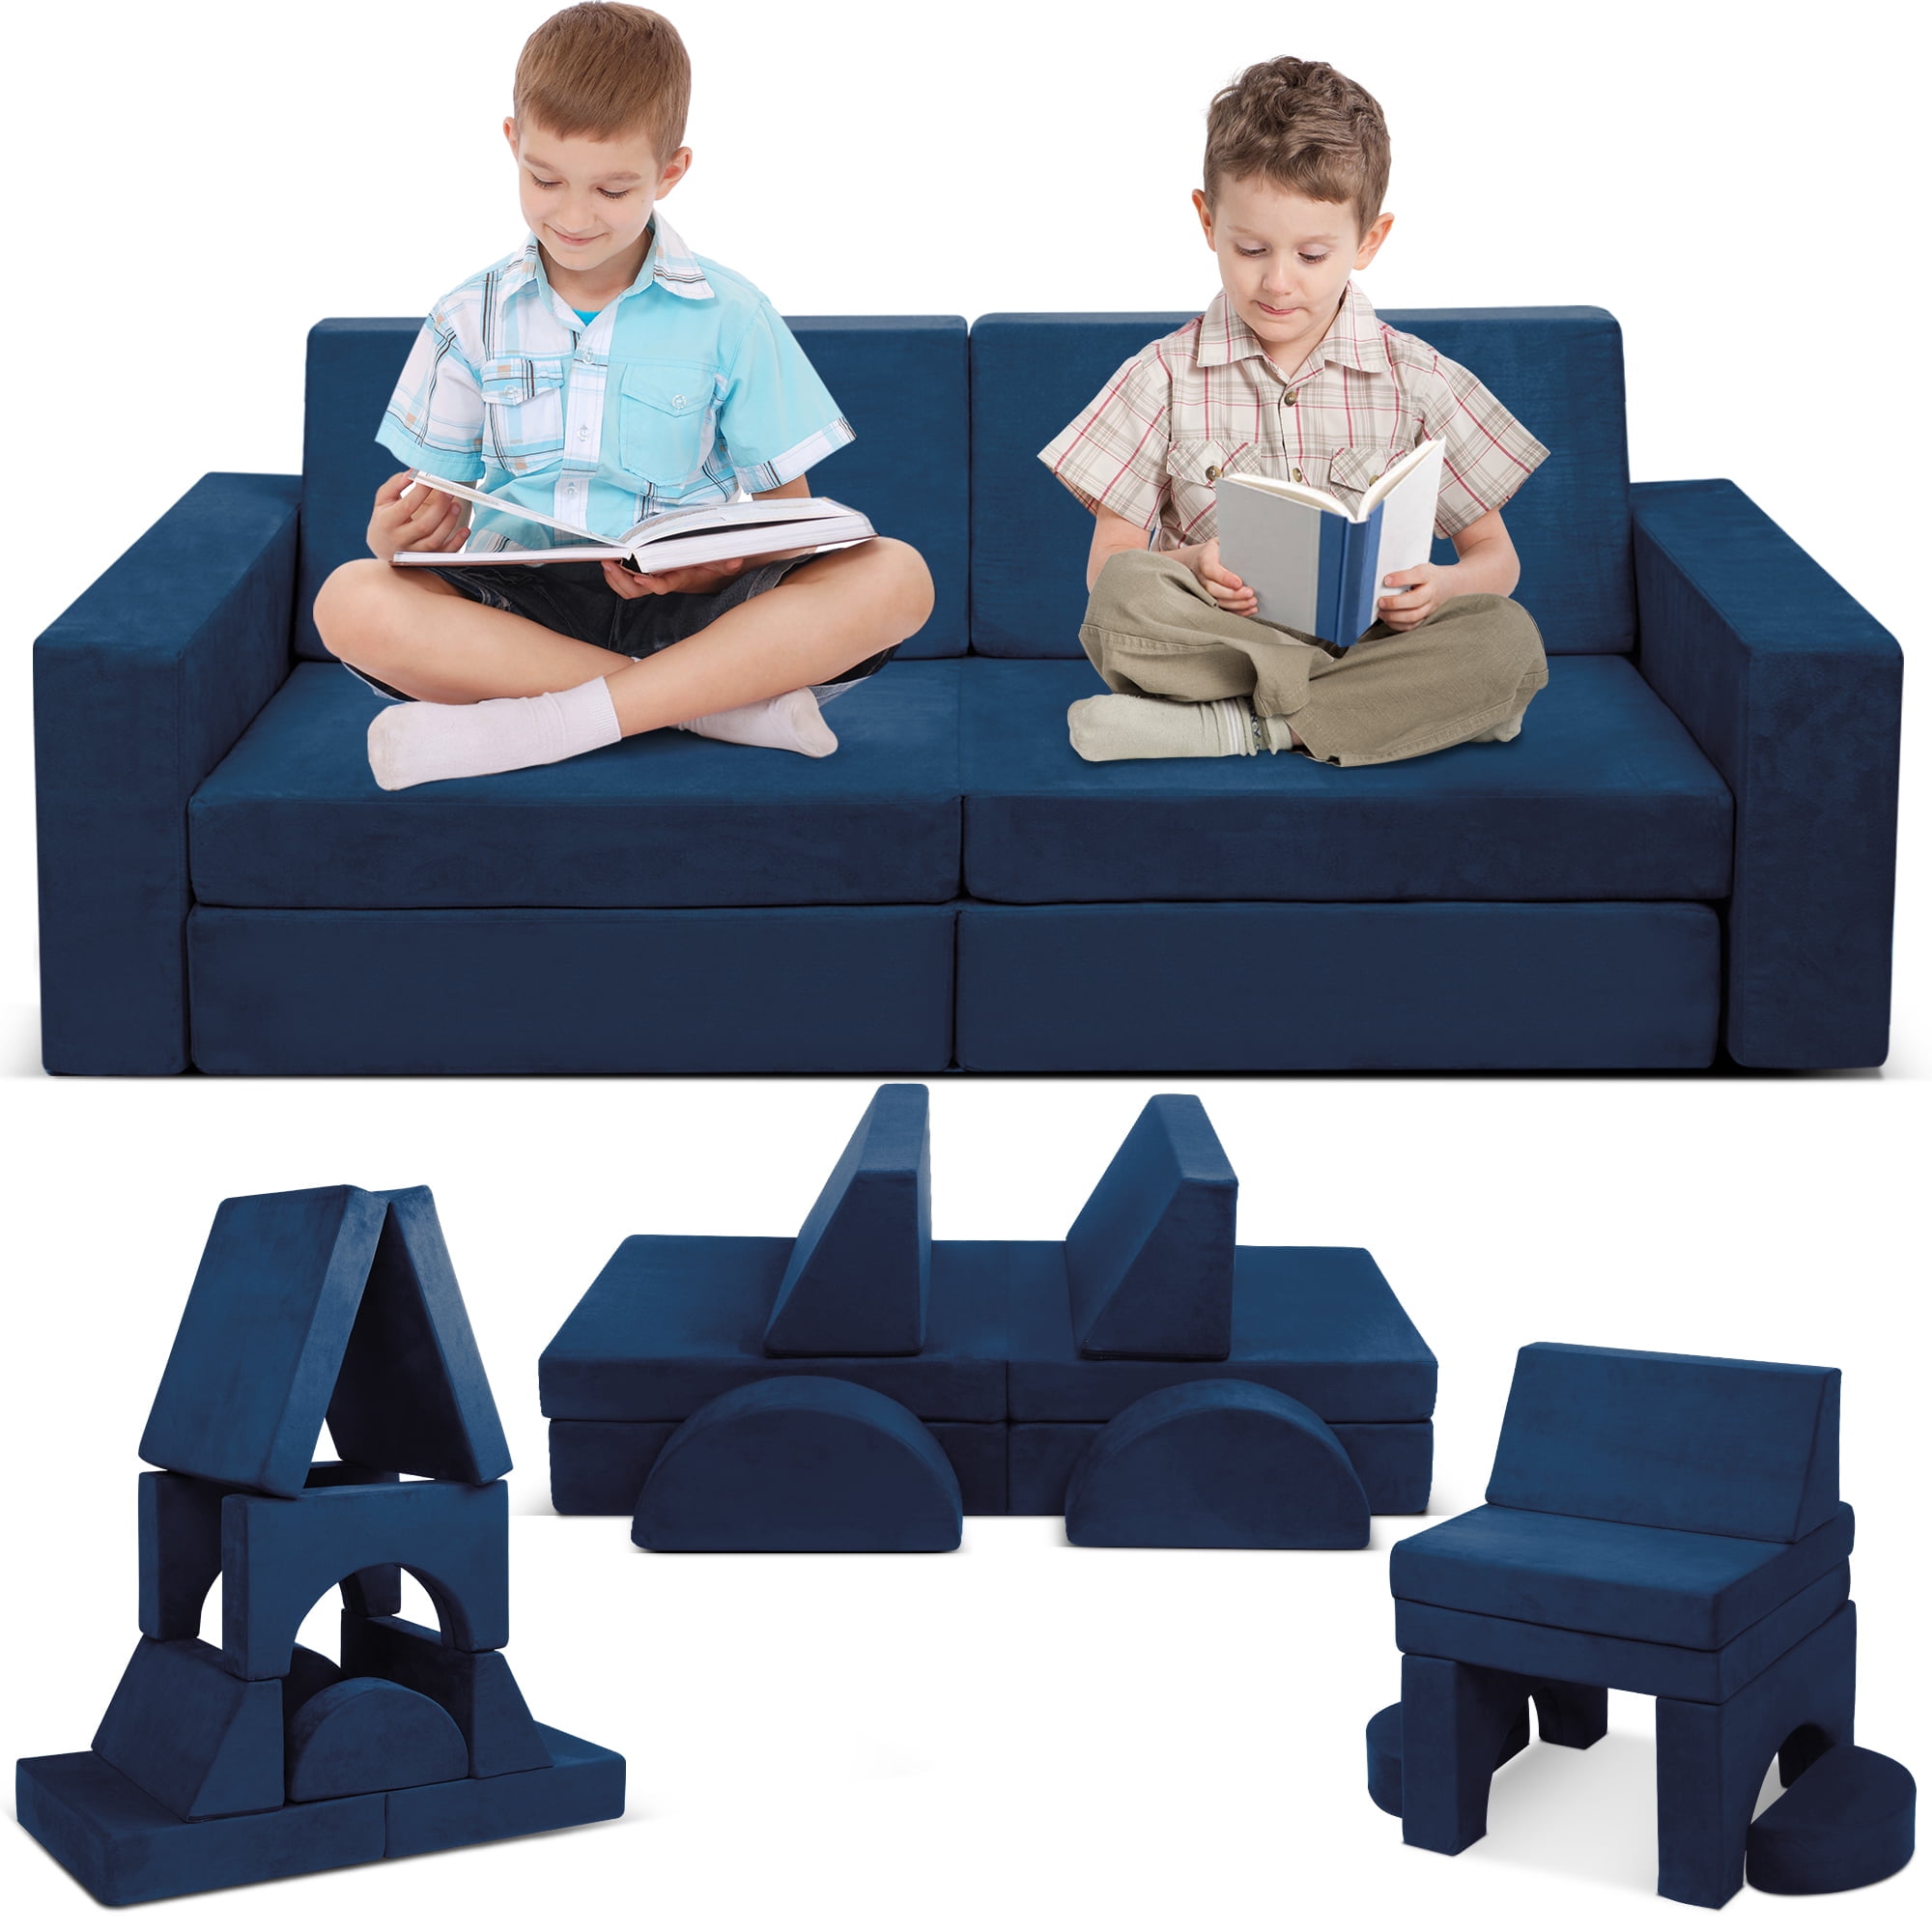 Tolead Kids to Play Gray Boys Play Child Convertible Sofa, Playroom Teen Furniture Sofa, and Modular Imaginative Girls Kids,Toddler Bedroom Set for Sectional Furniture, Creative Couch